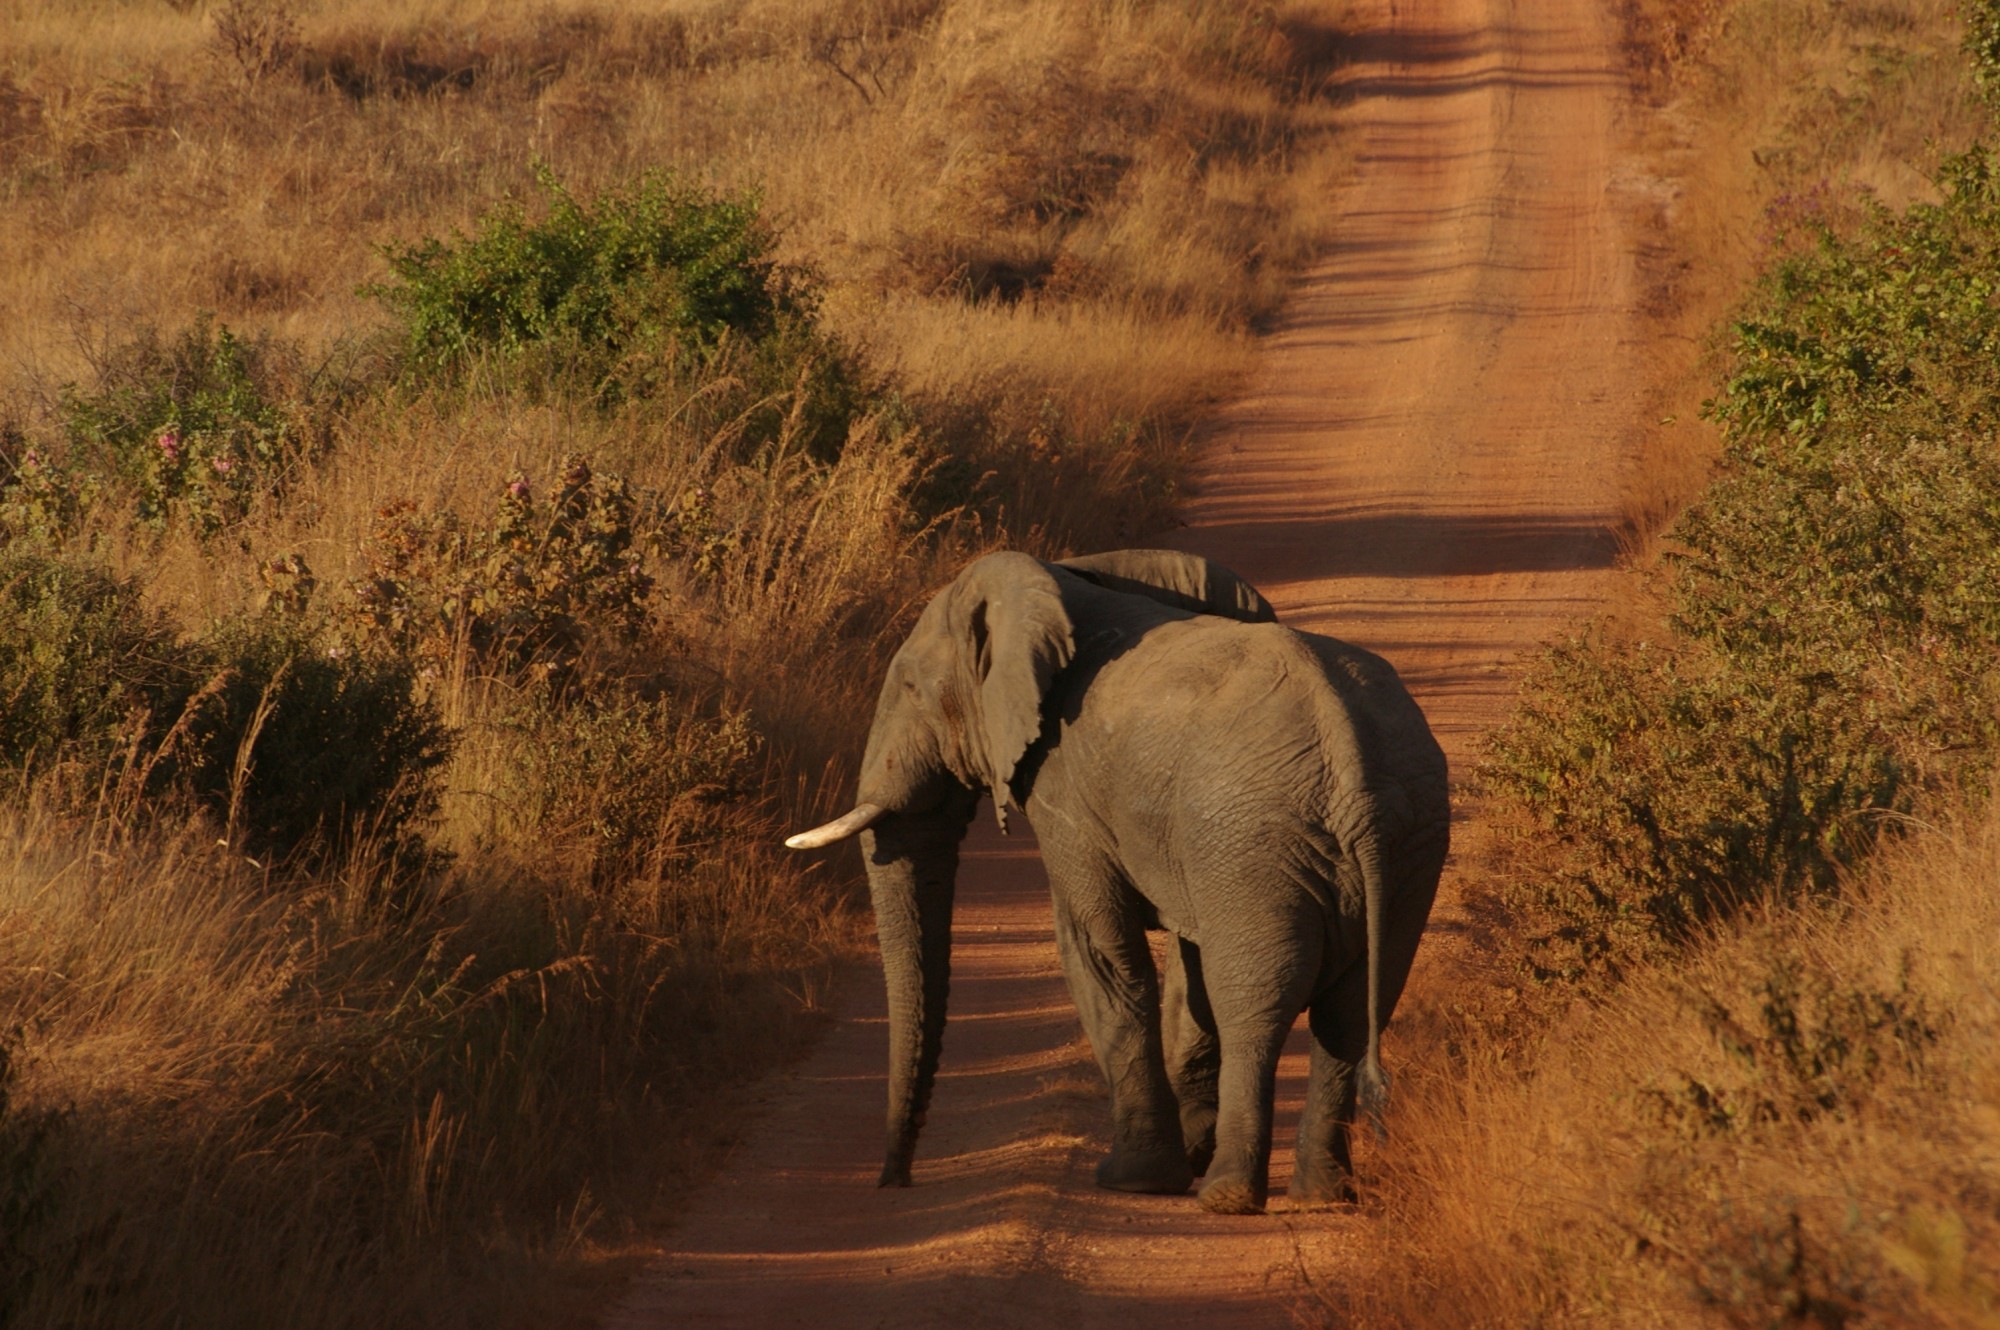 The elephant stands sideways across a dirt road with high bushy growth on either side.